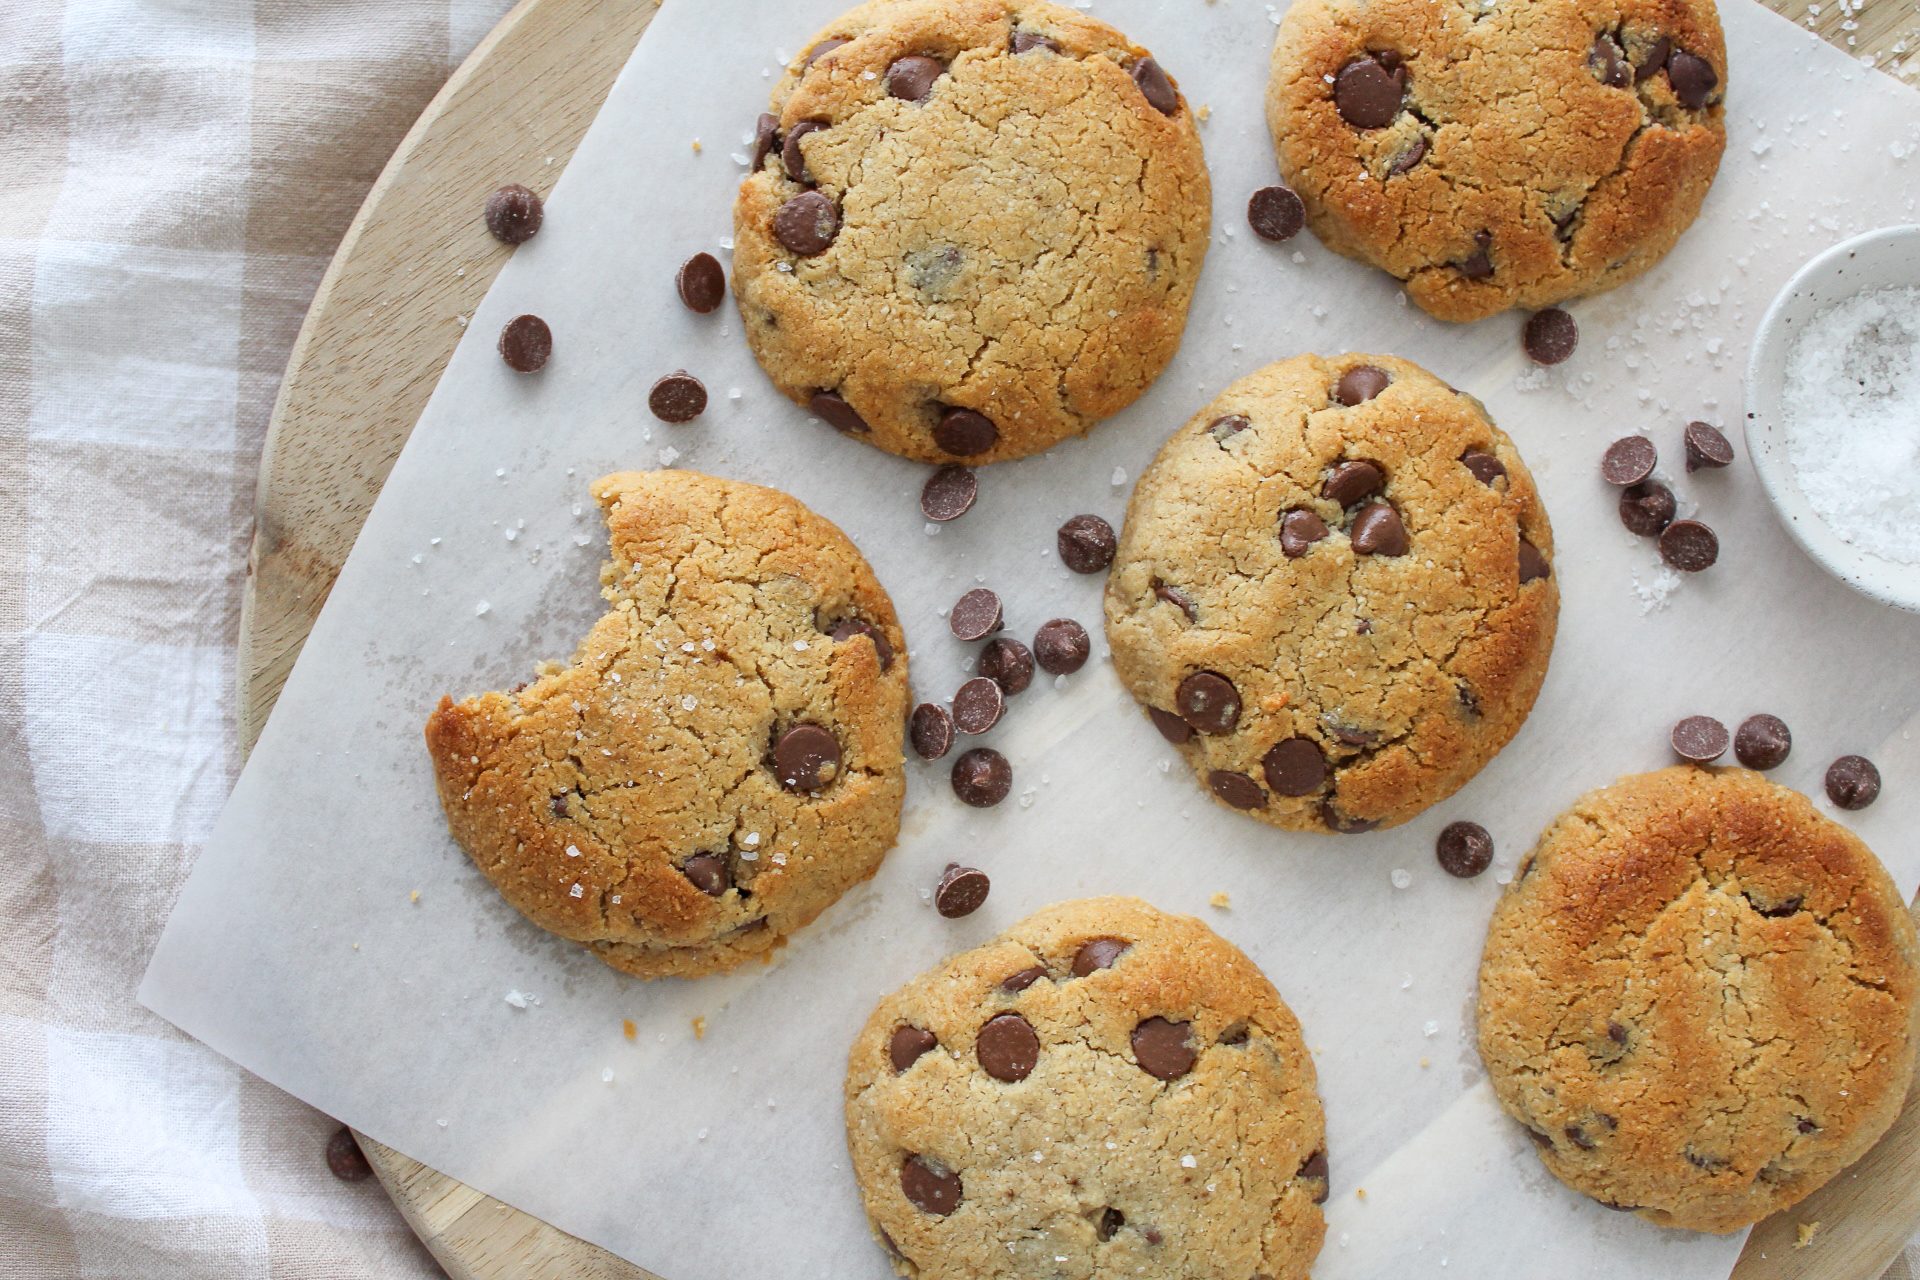 New Recipe: The Best Chocolate Chip Cookies